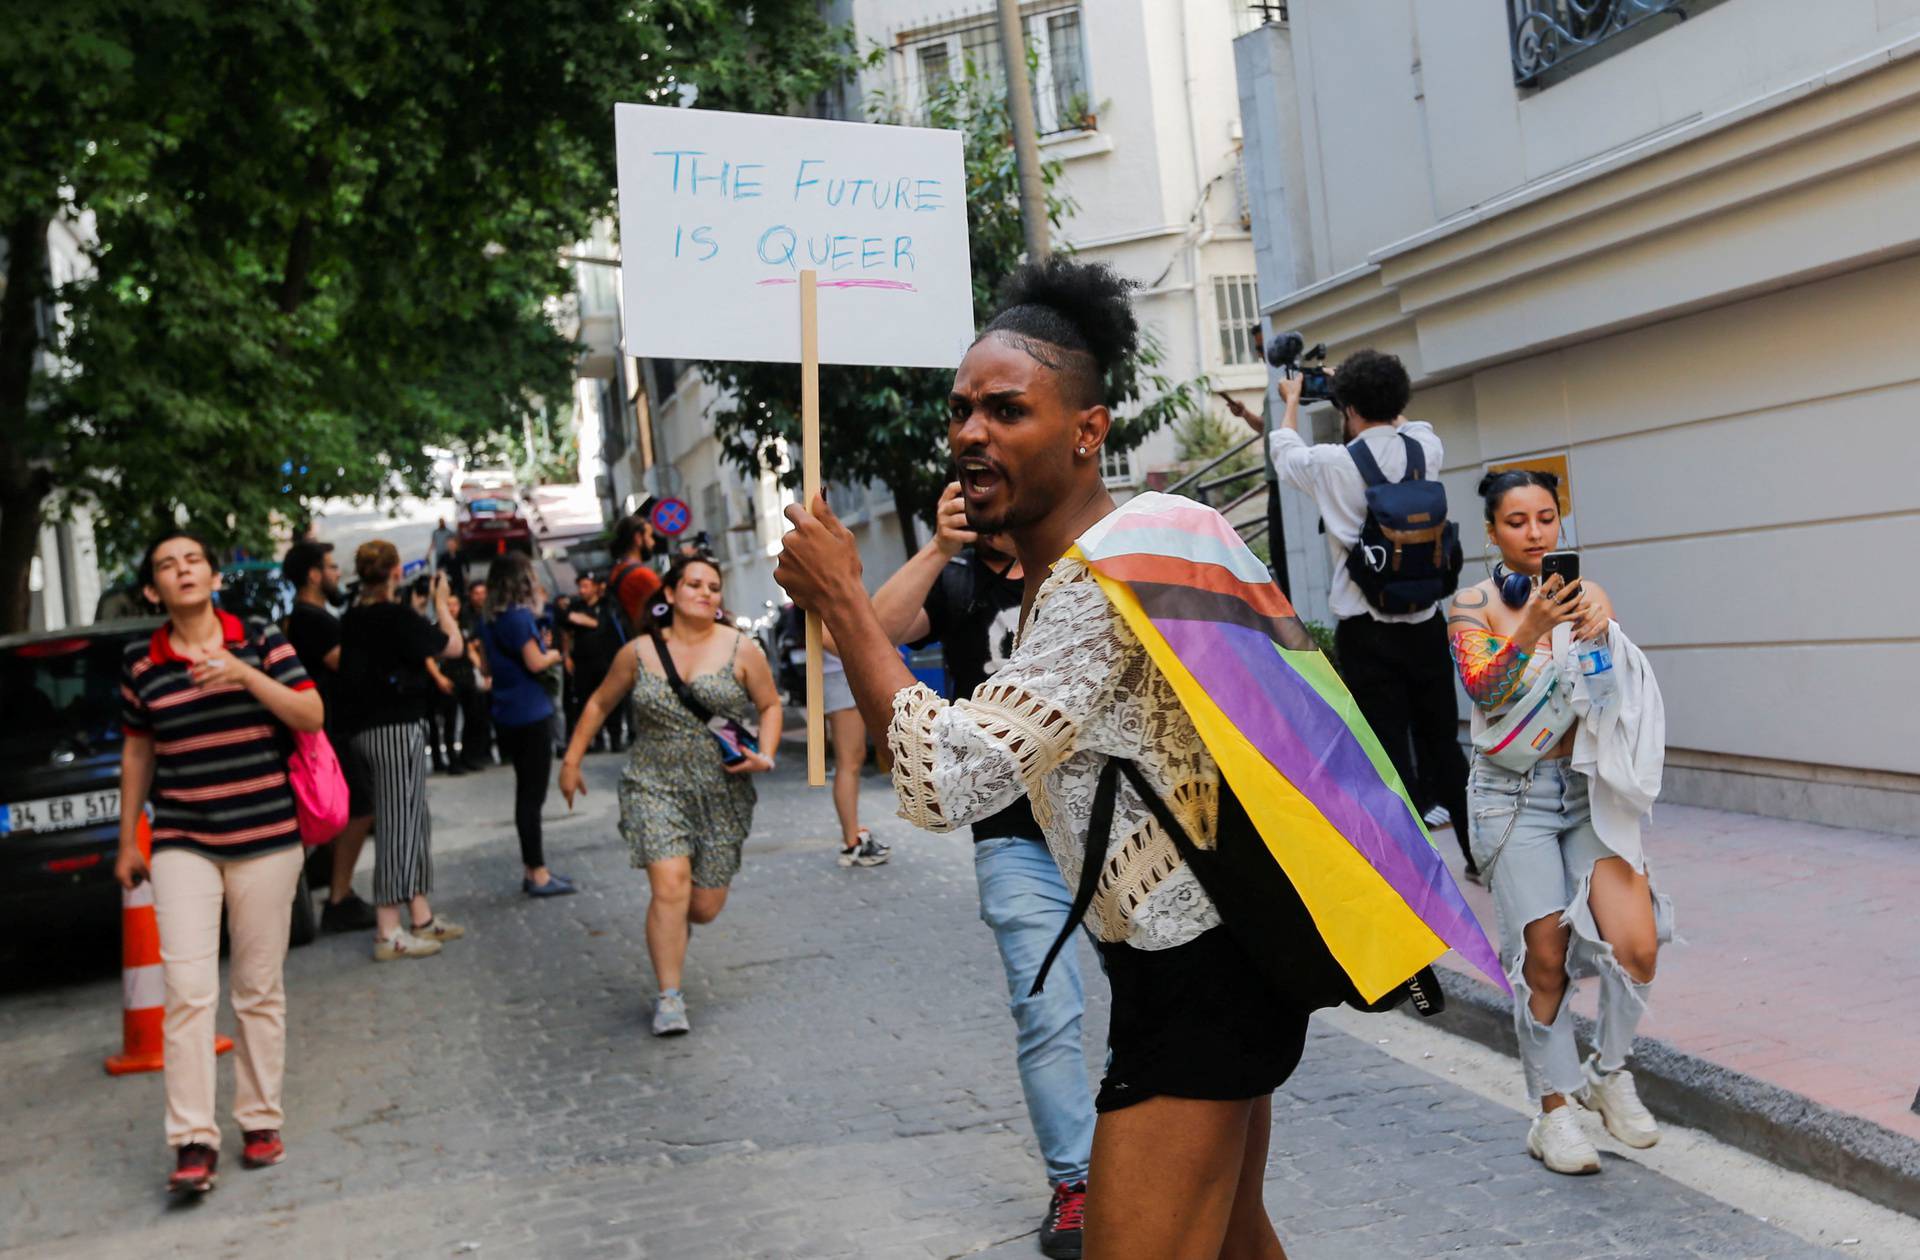 Demonstrators march as they try to gather for a pride parade in Istanbul